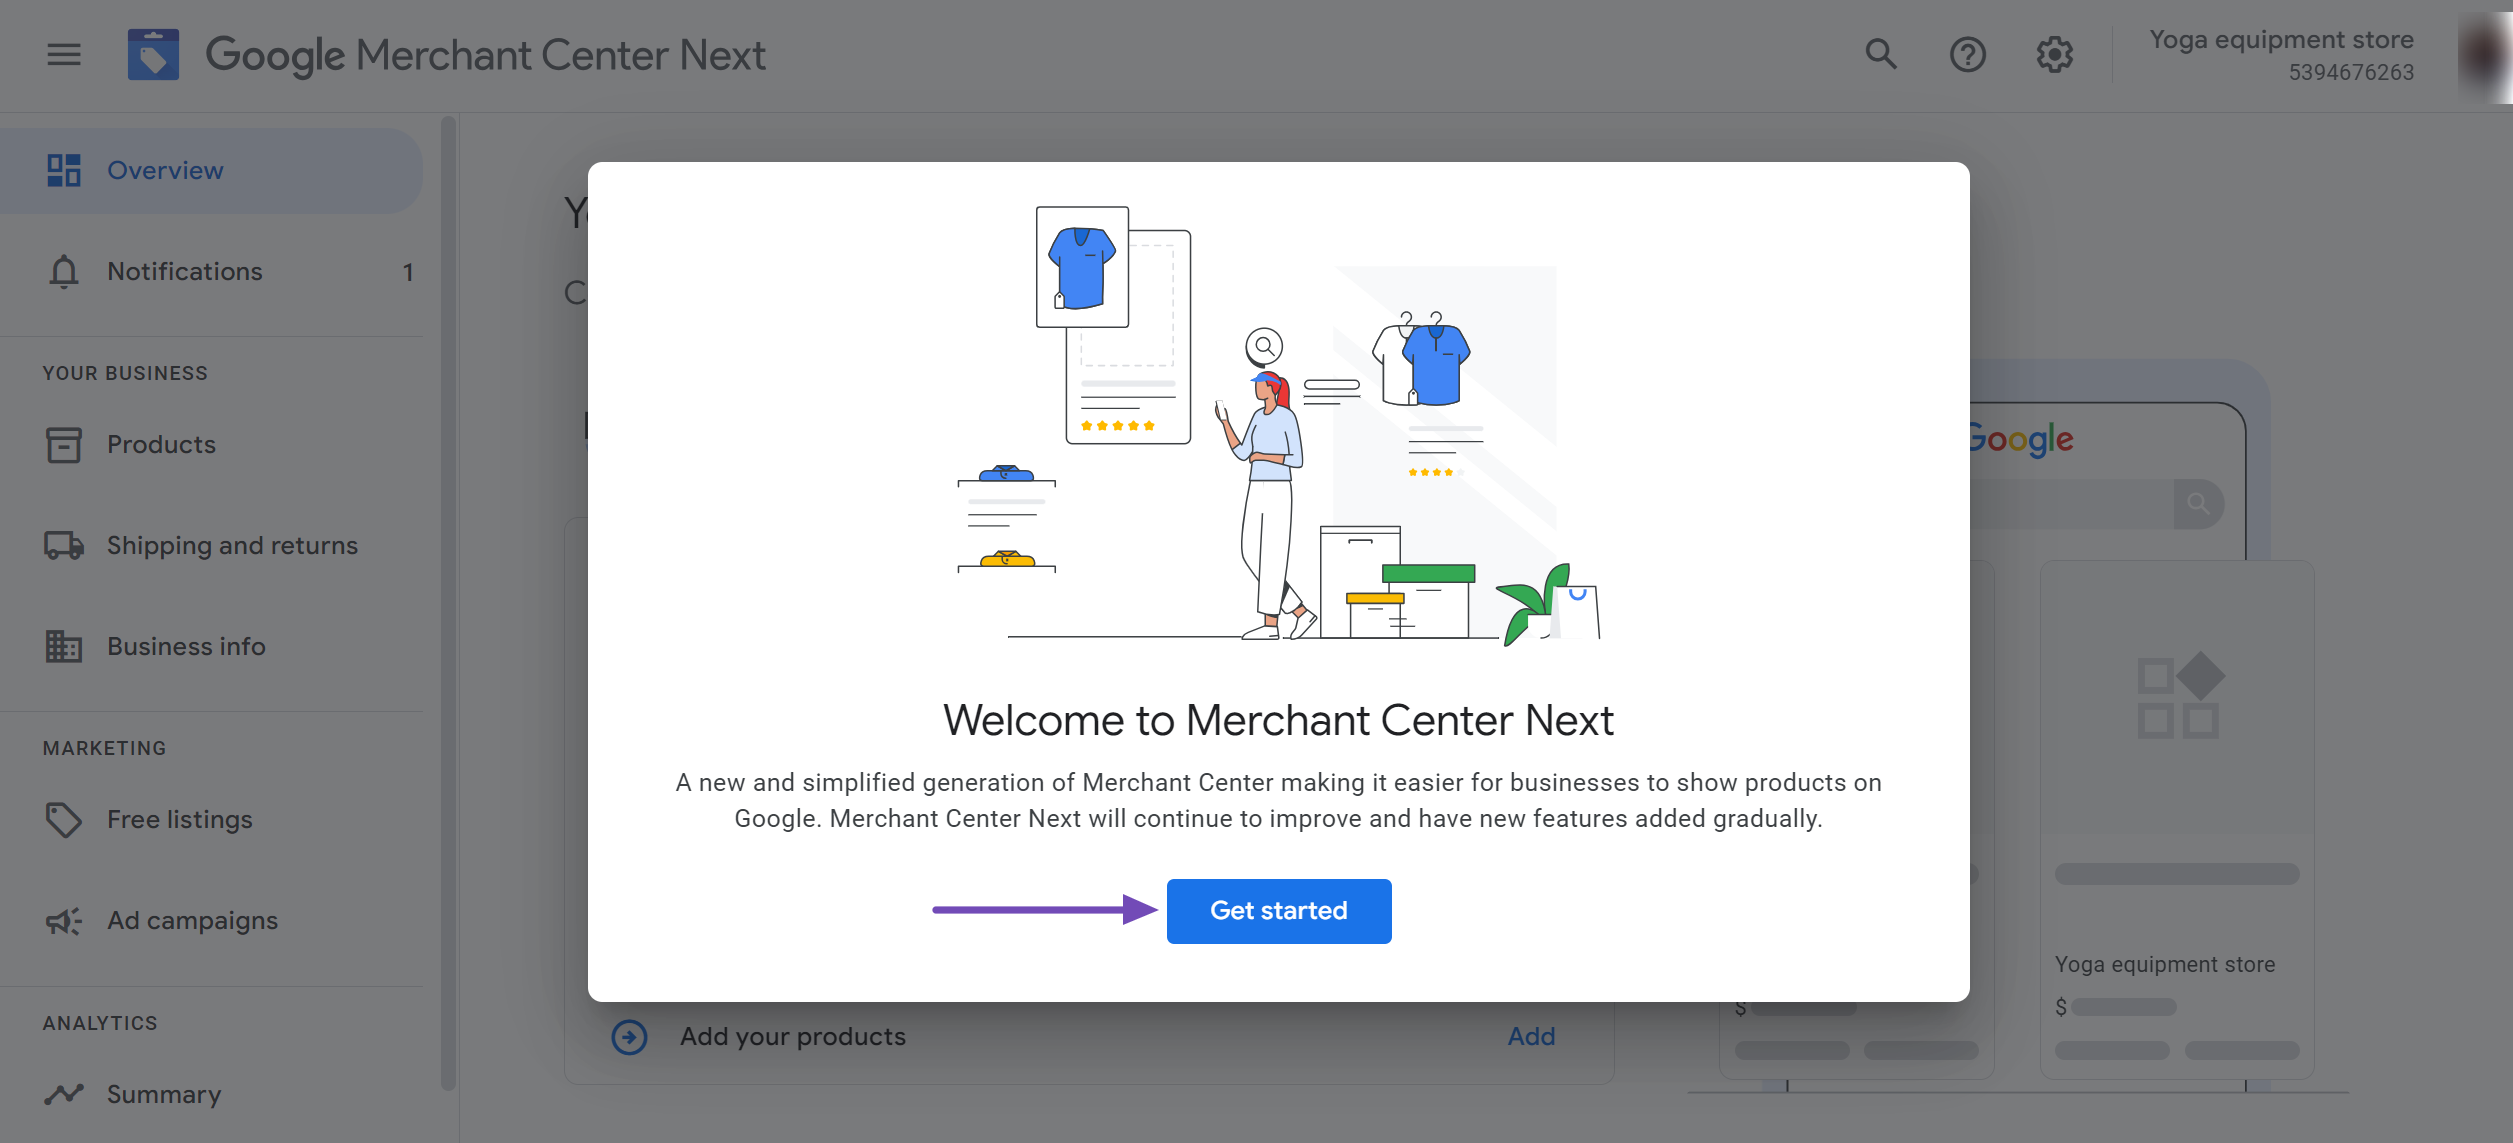 Click Get Started to access the Merchant Center dashboard